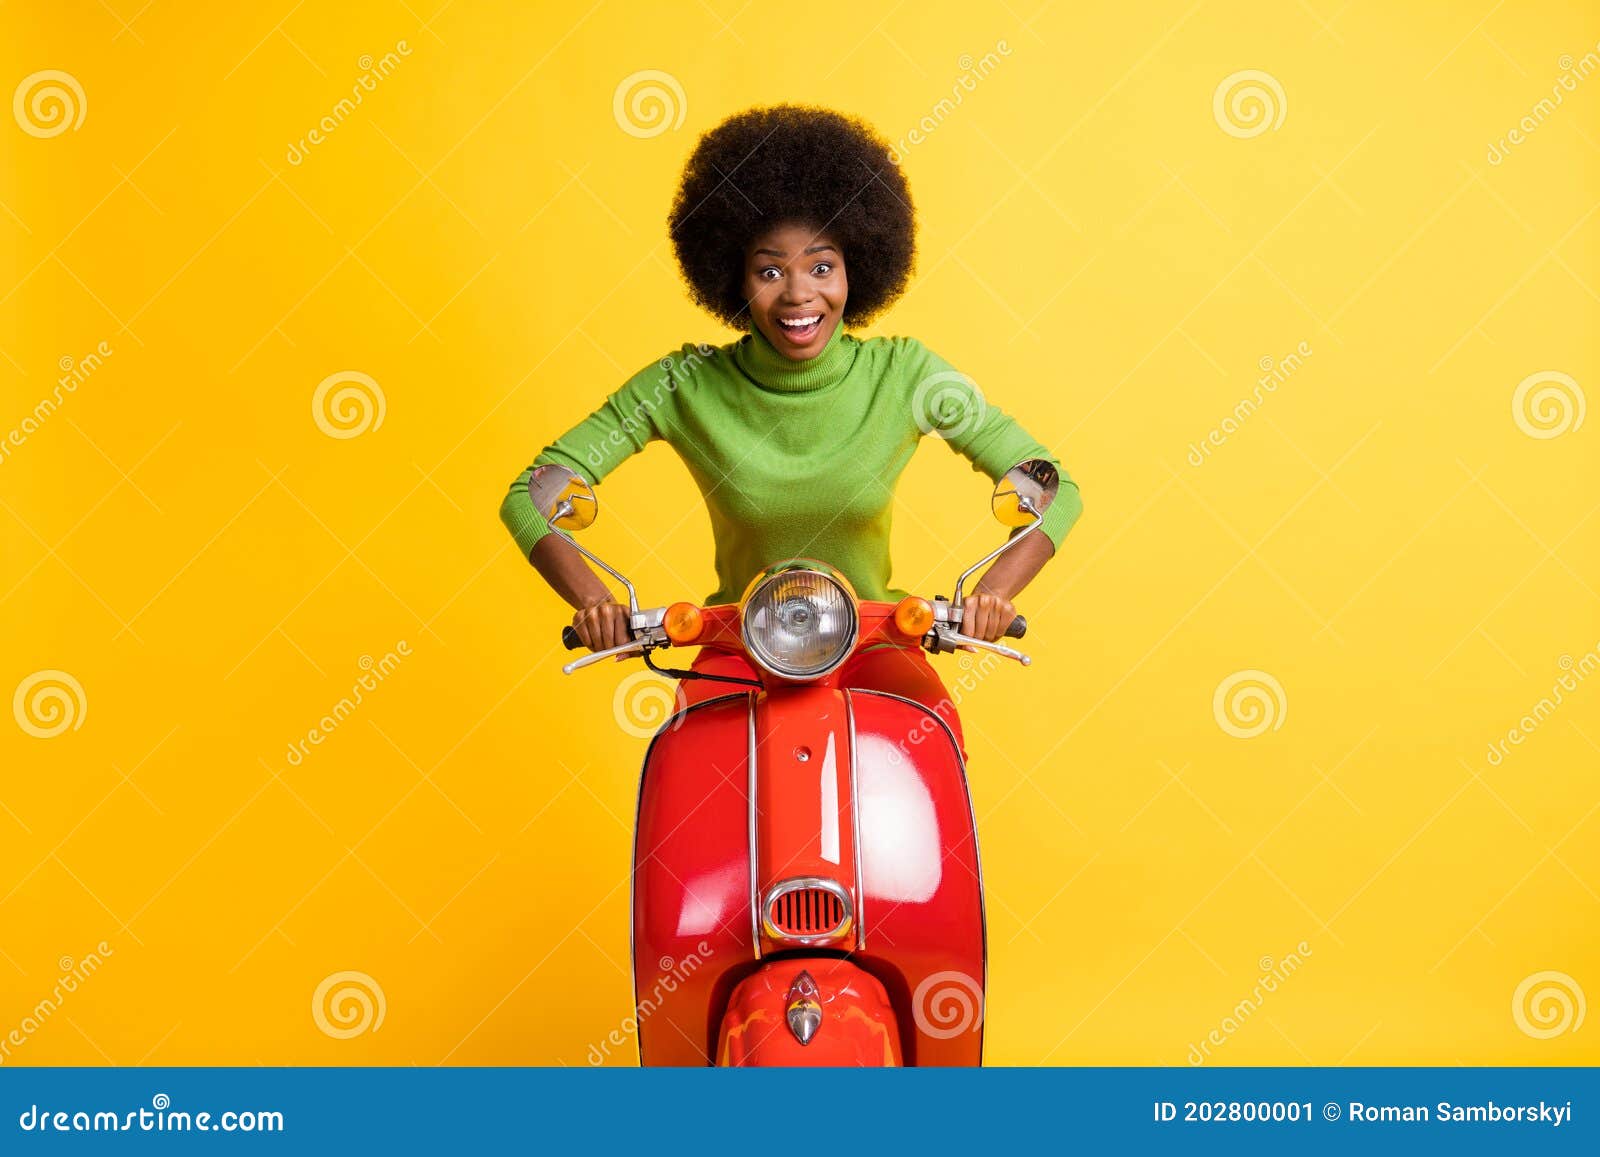 160 Black American Delivery Bike Stock Photos - Free & Royalty-Free ...